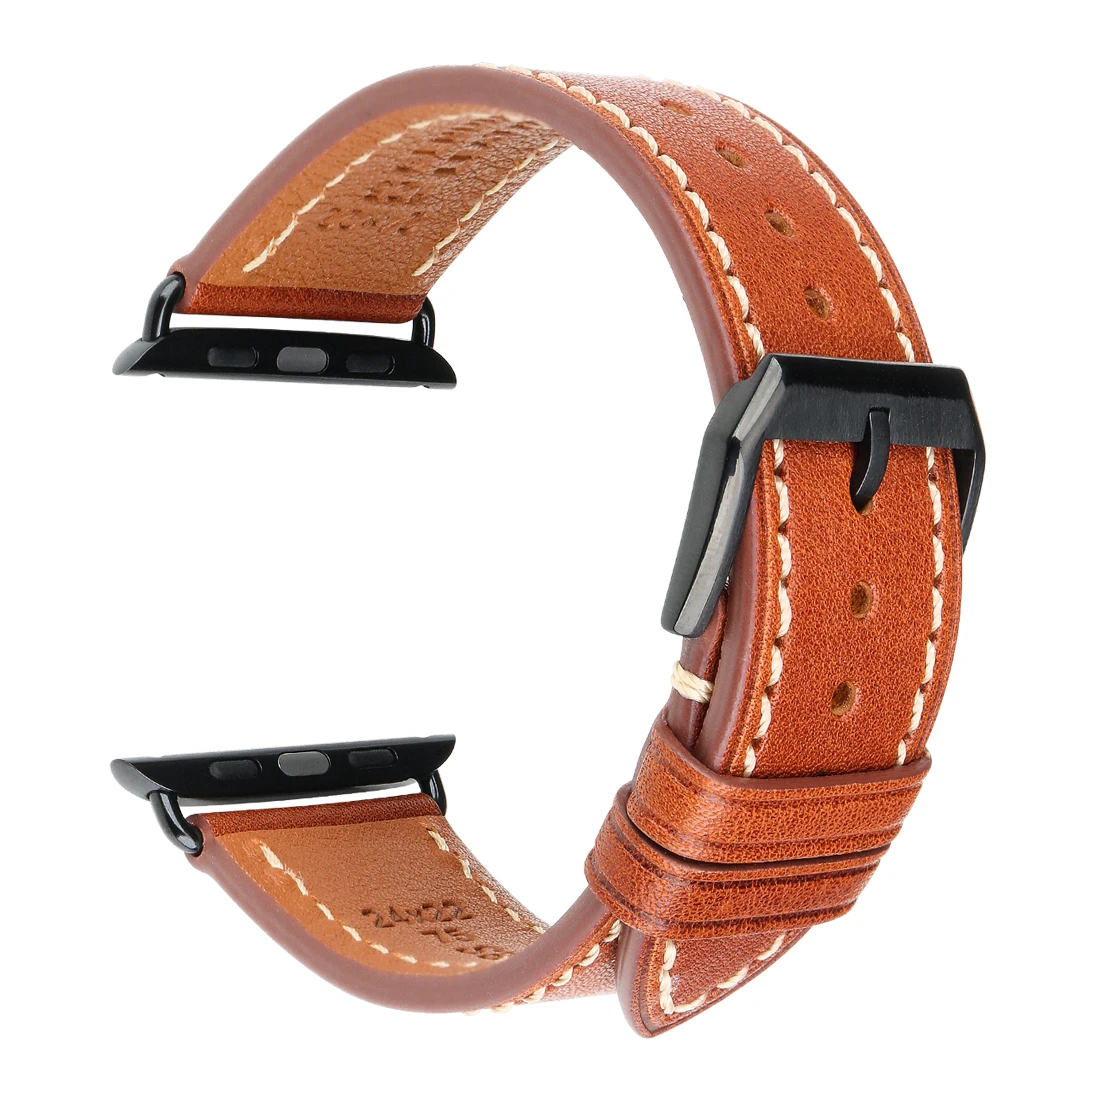 

Amazon Hot Sell Compatible with Apple Watch Band 45mm 44mm 42mm 38mm 40mm 41mm Genuine Leather Bands Compatible iWatch Bracelet, Black, light brown, dark brown